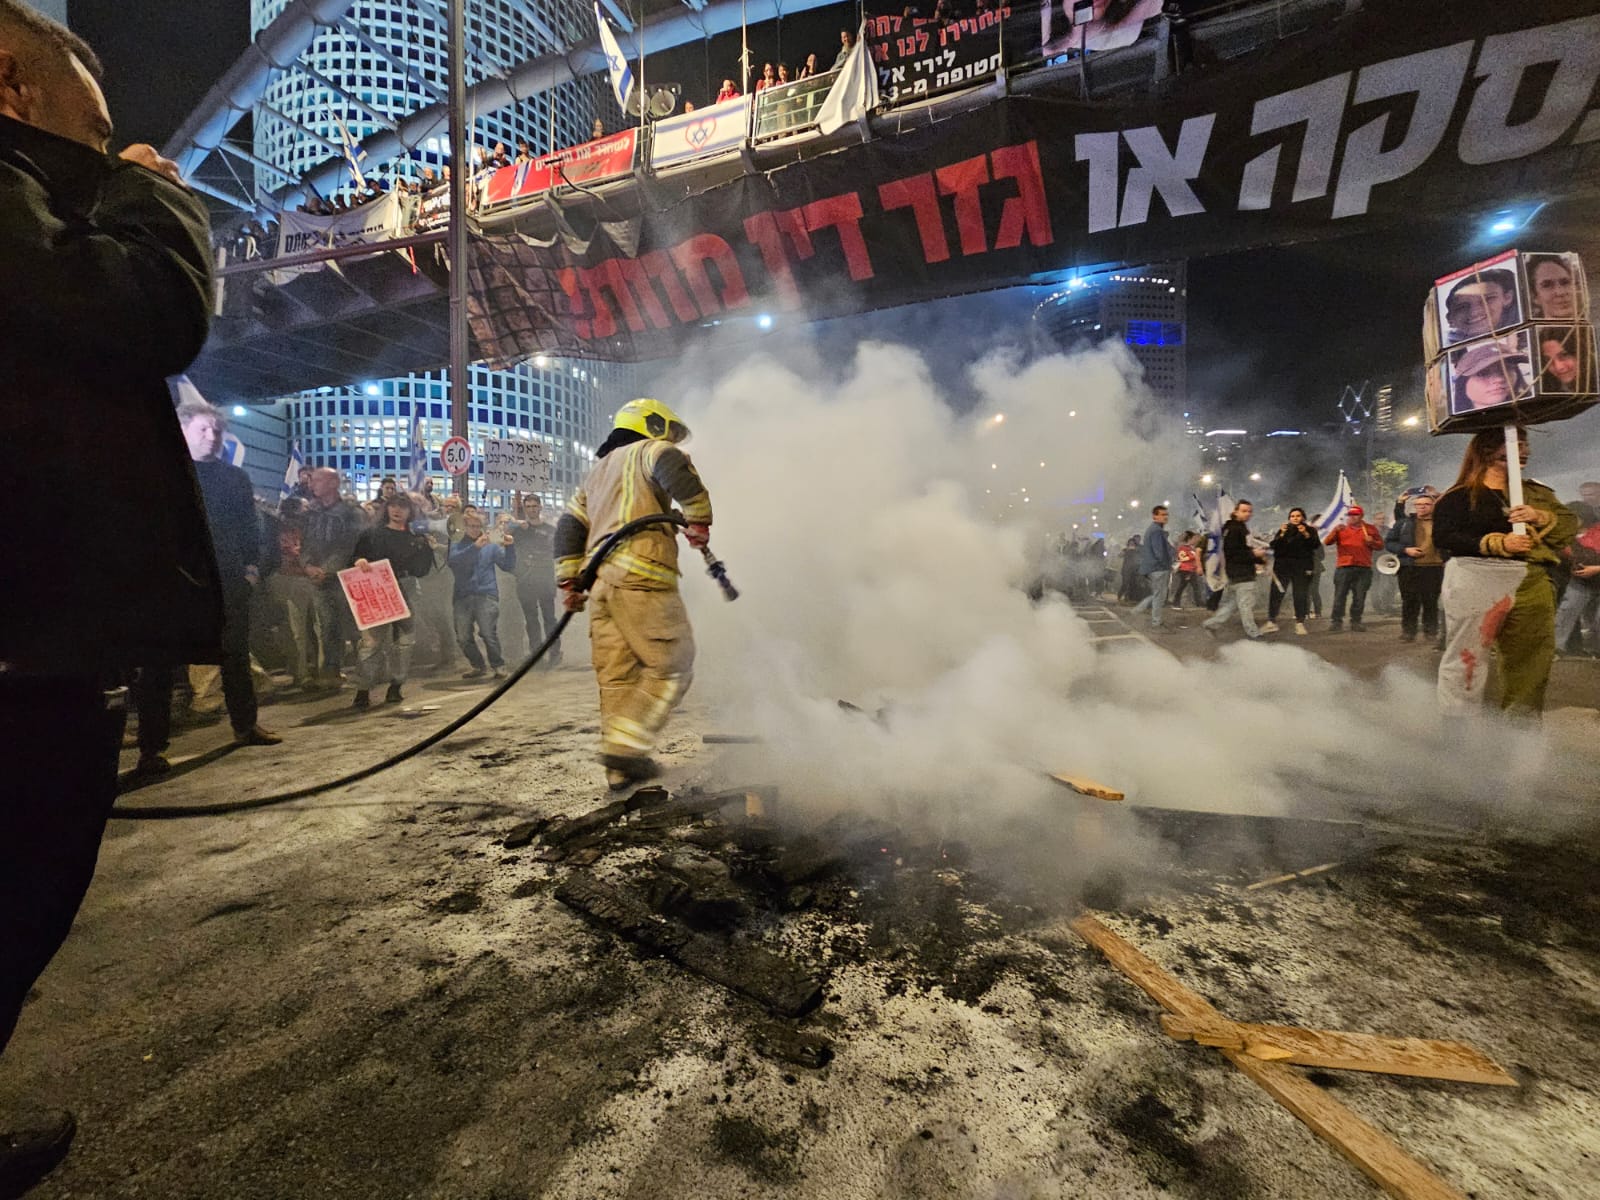 Firemen put out a fire set by protesters in front of the Kirya demanding that the government act to release the abductees (Photo: Doron Hebsi)